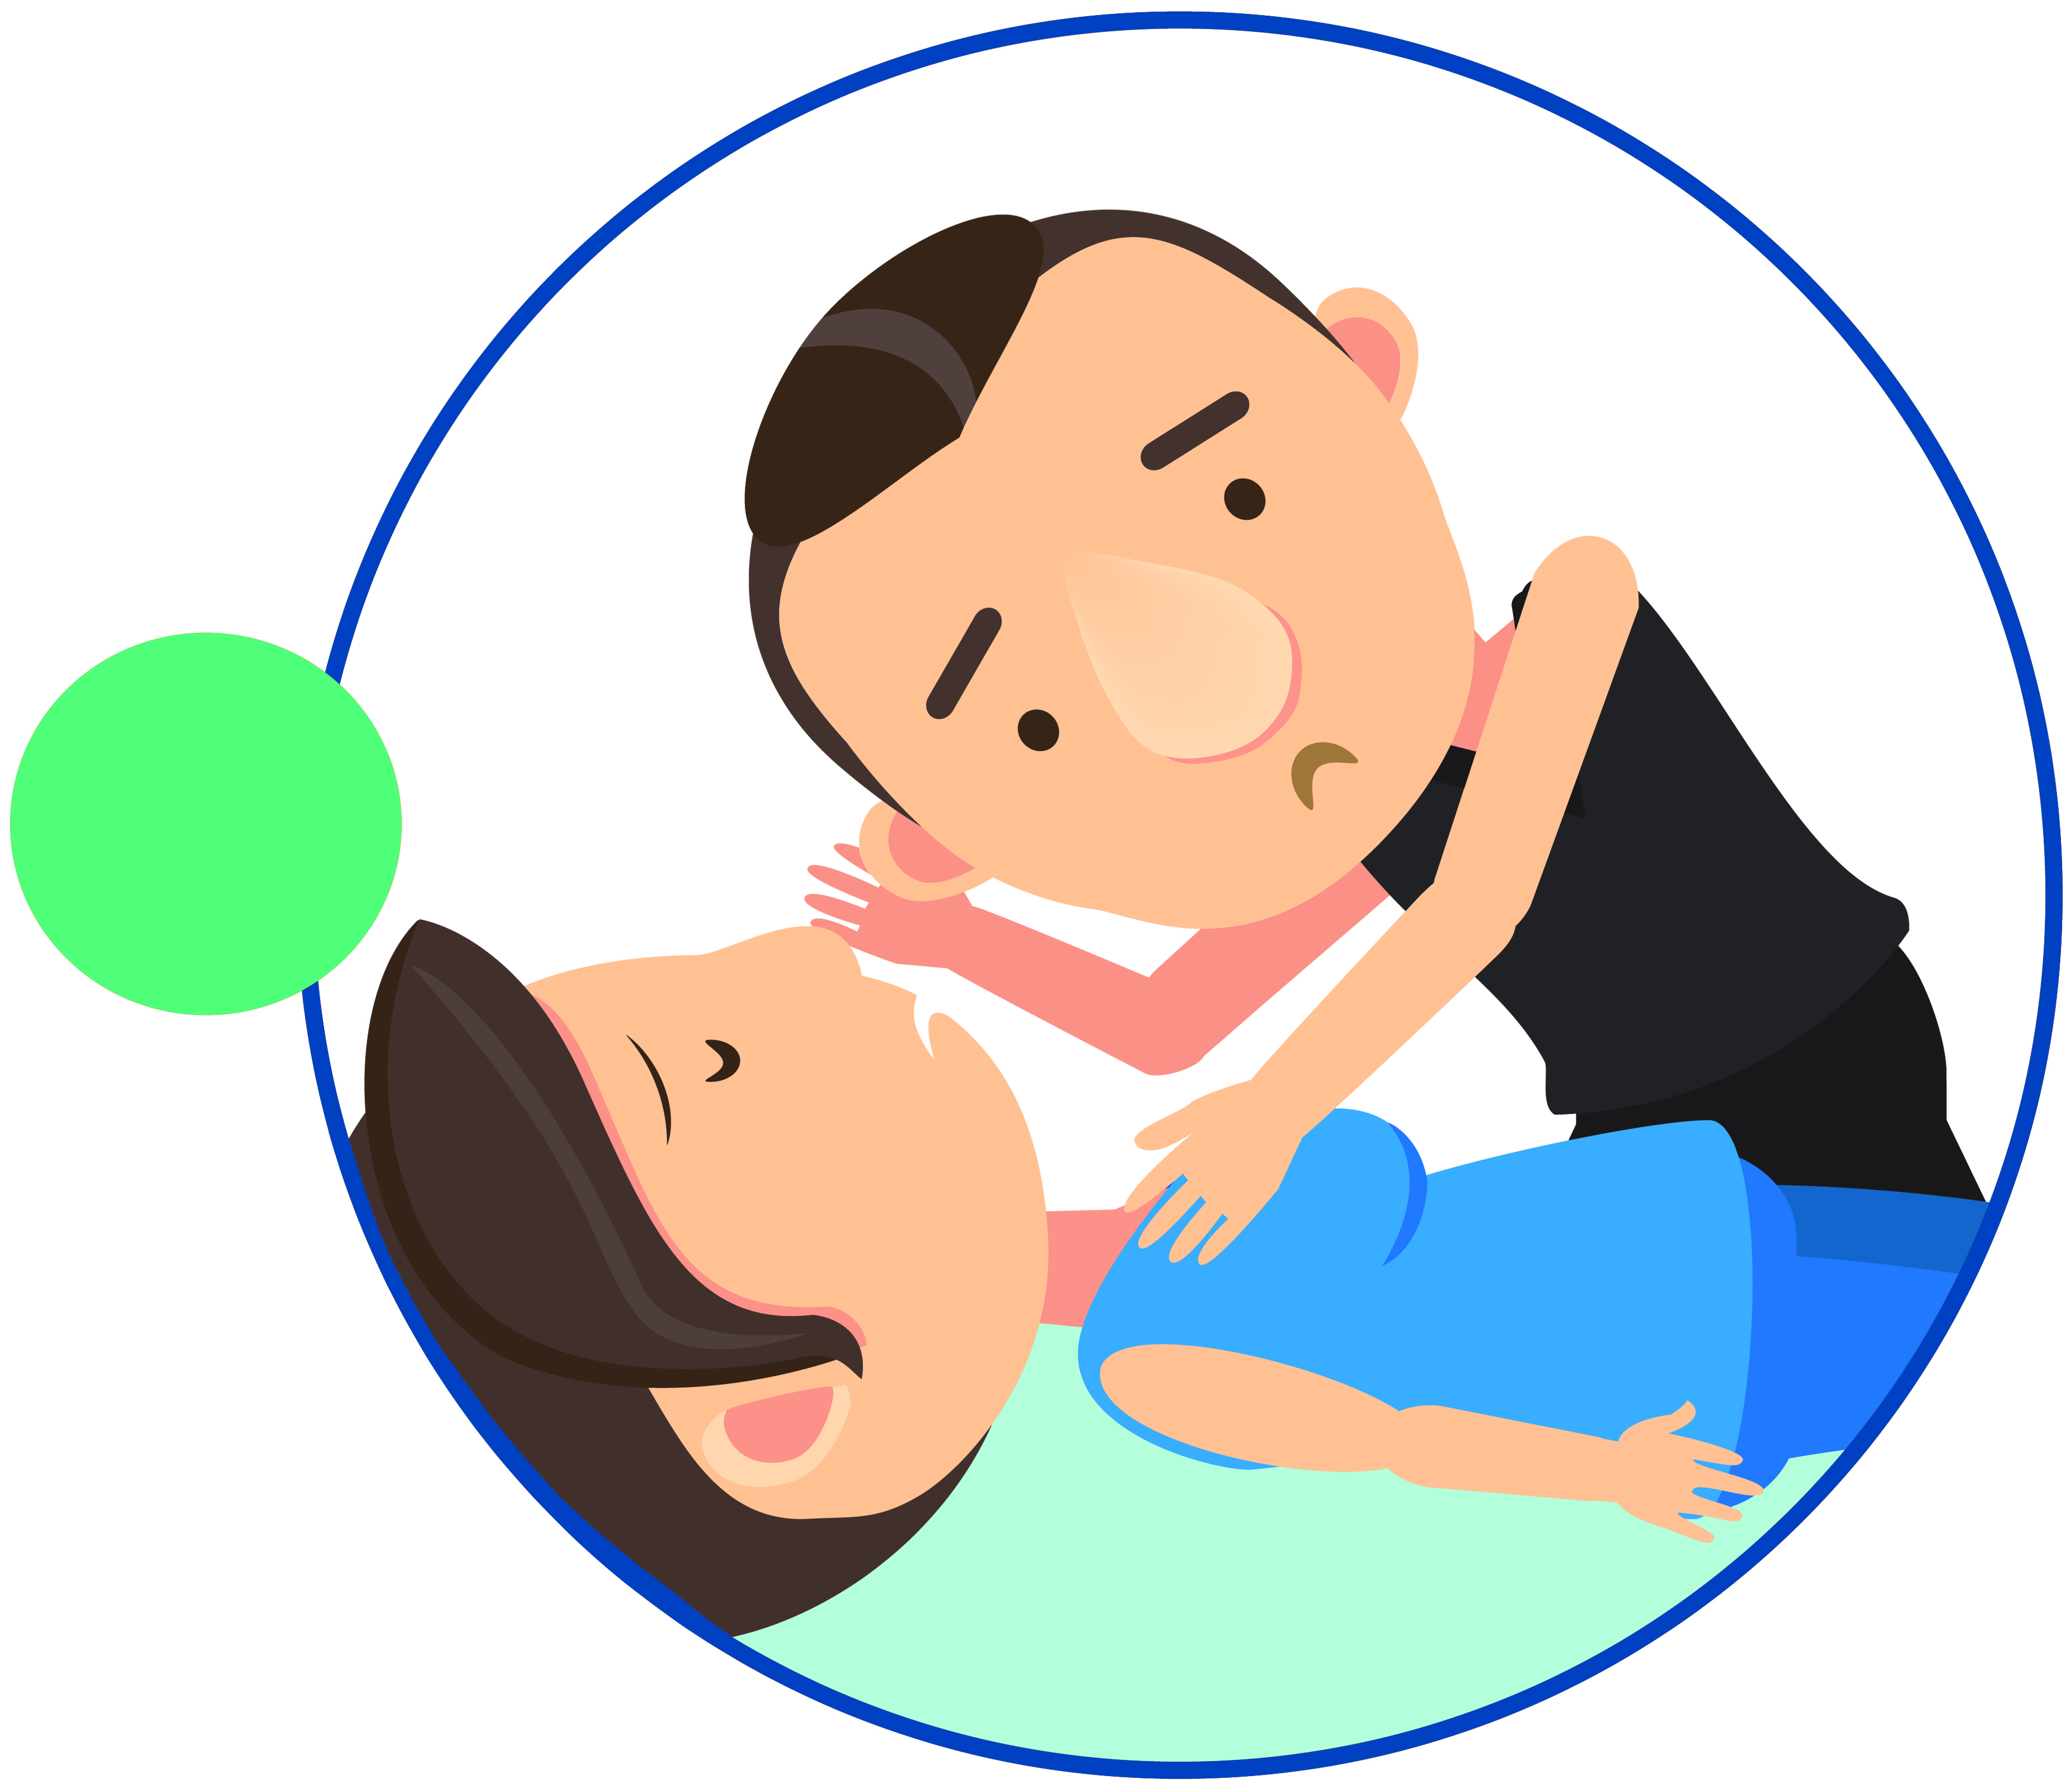 Emergency first aid for. Breathing clipart boy